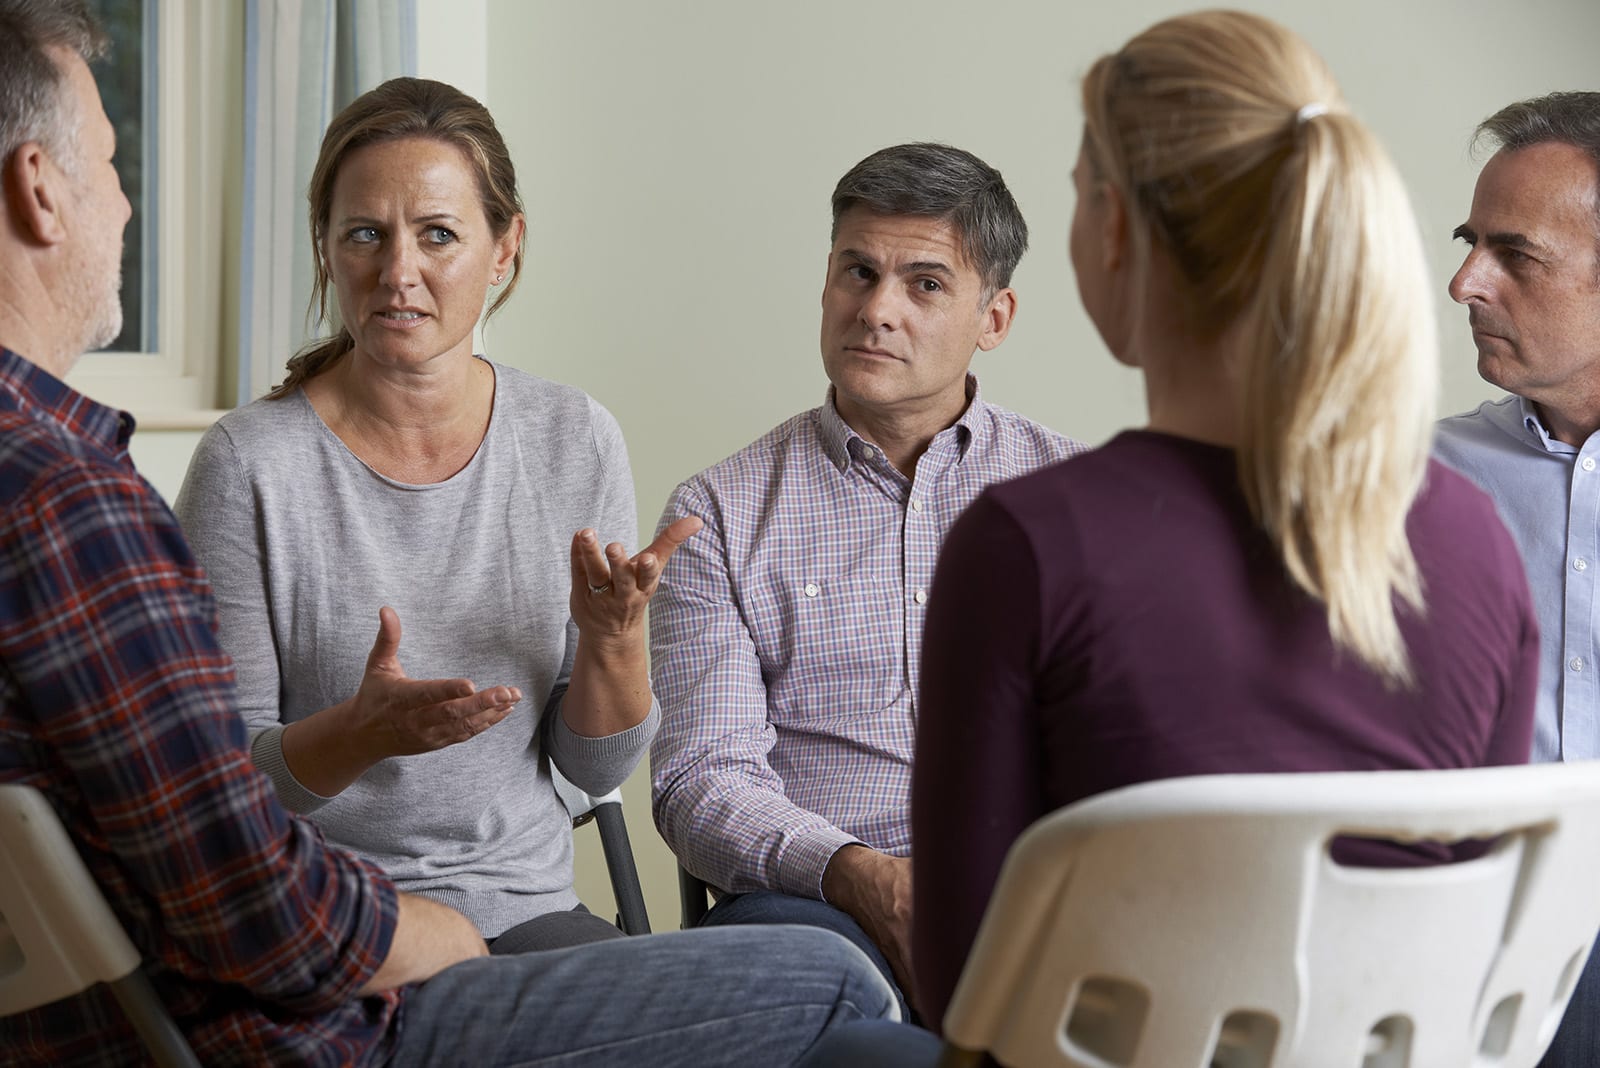 Members Of Support Group Sitting In Chairs Having Meeting